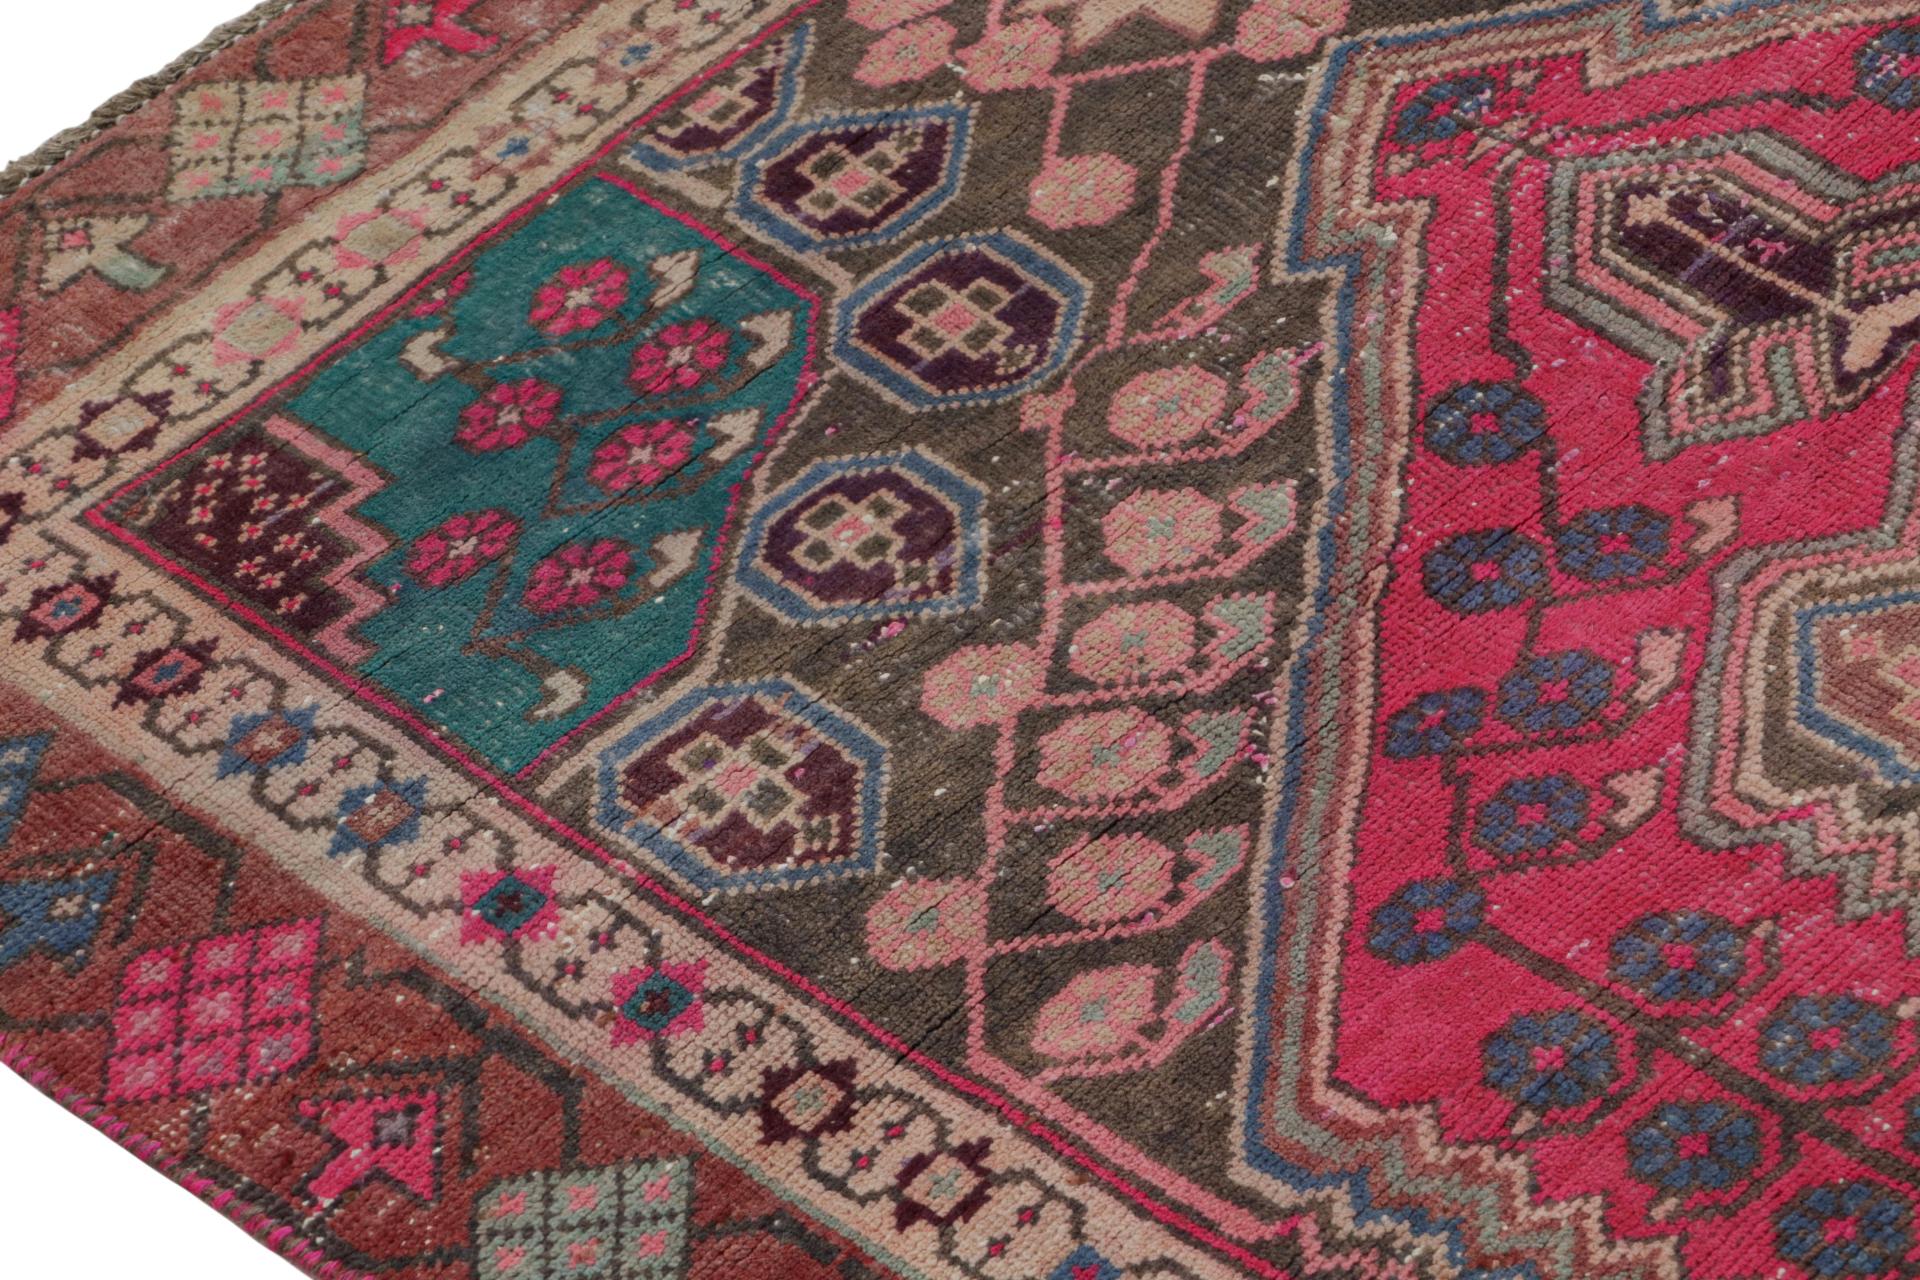 Vintage Persian Shiraz rug in Pink and Teal Floral Patterns by Rug & Kilim In Good Condition For Sale In Long Island City, NY